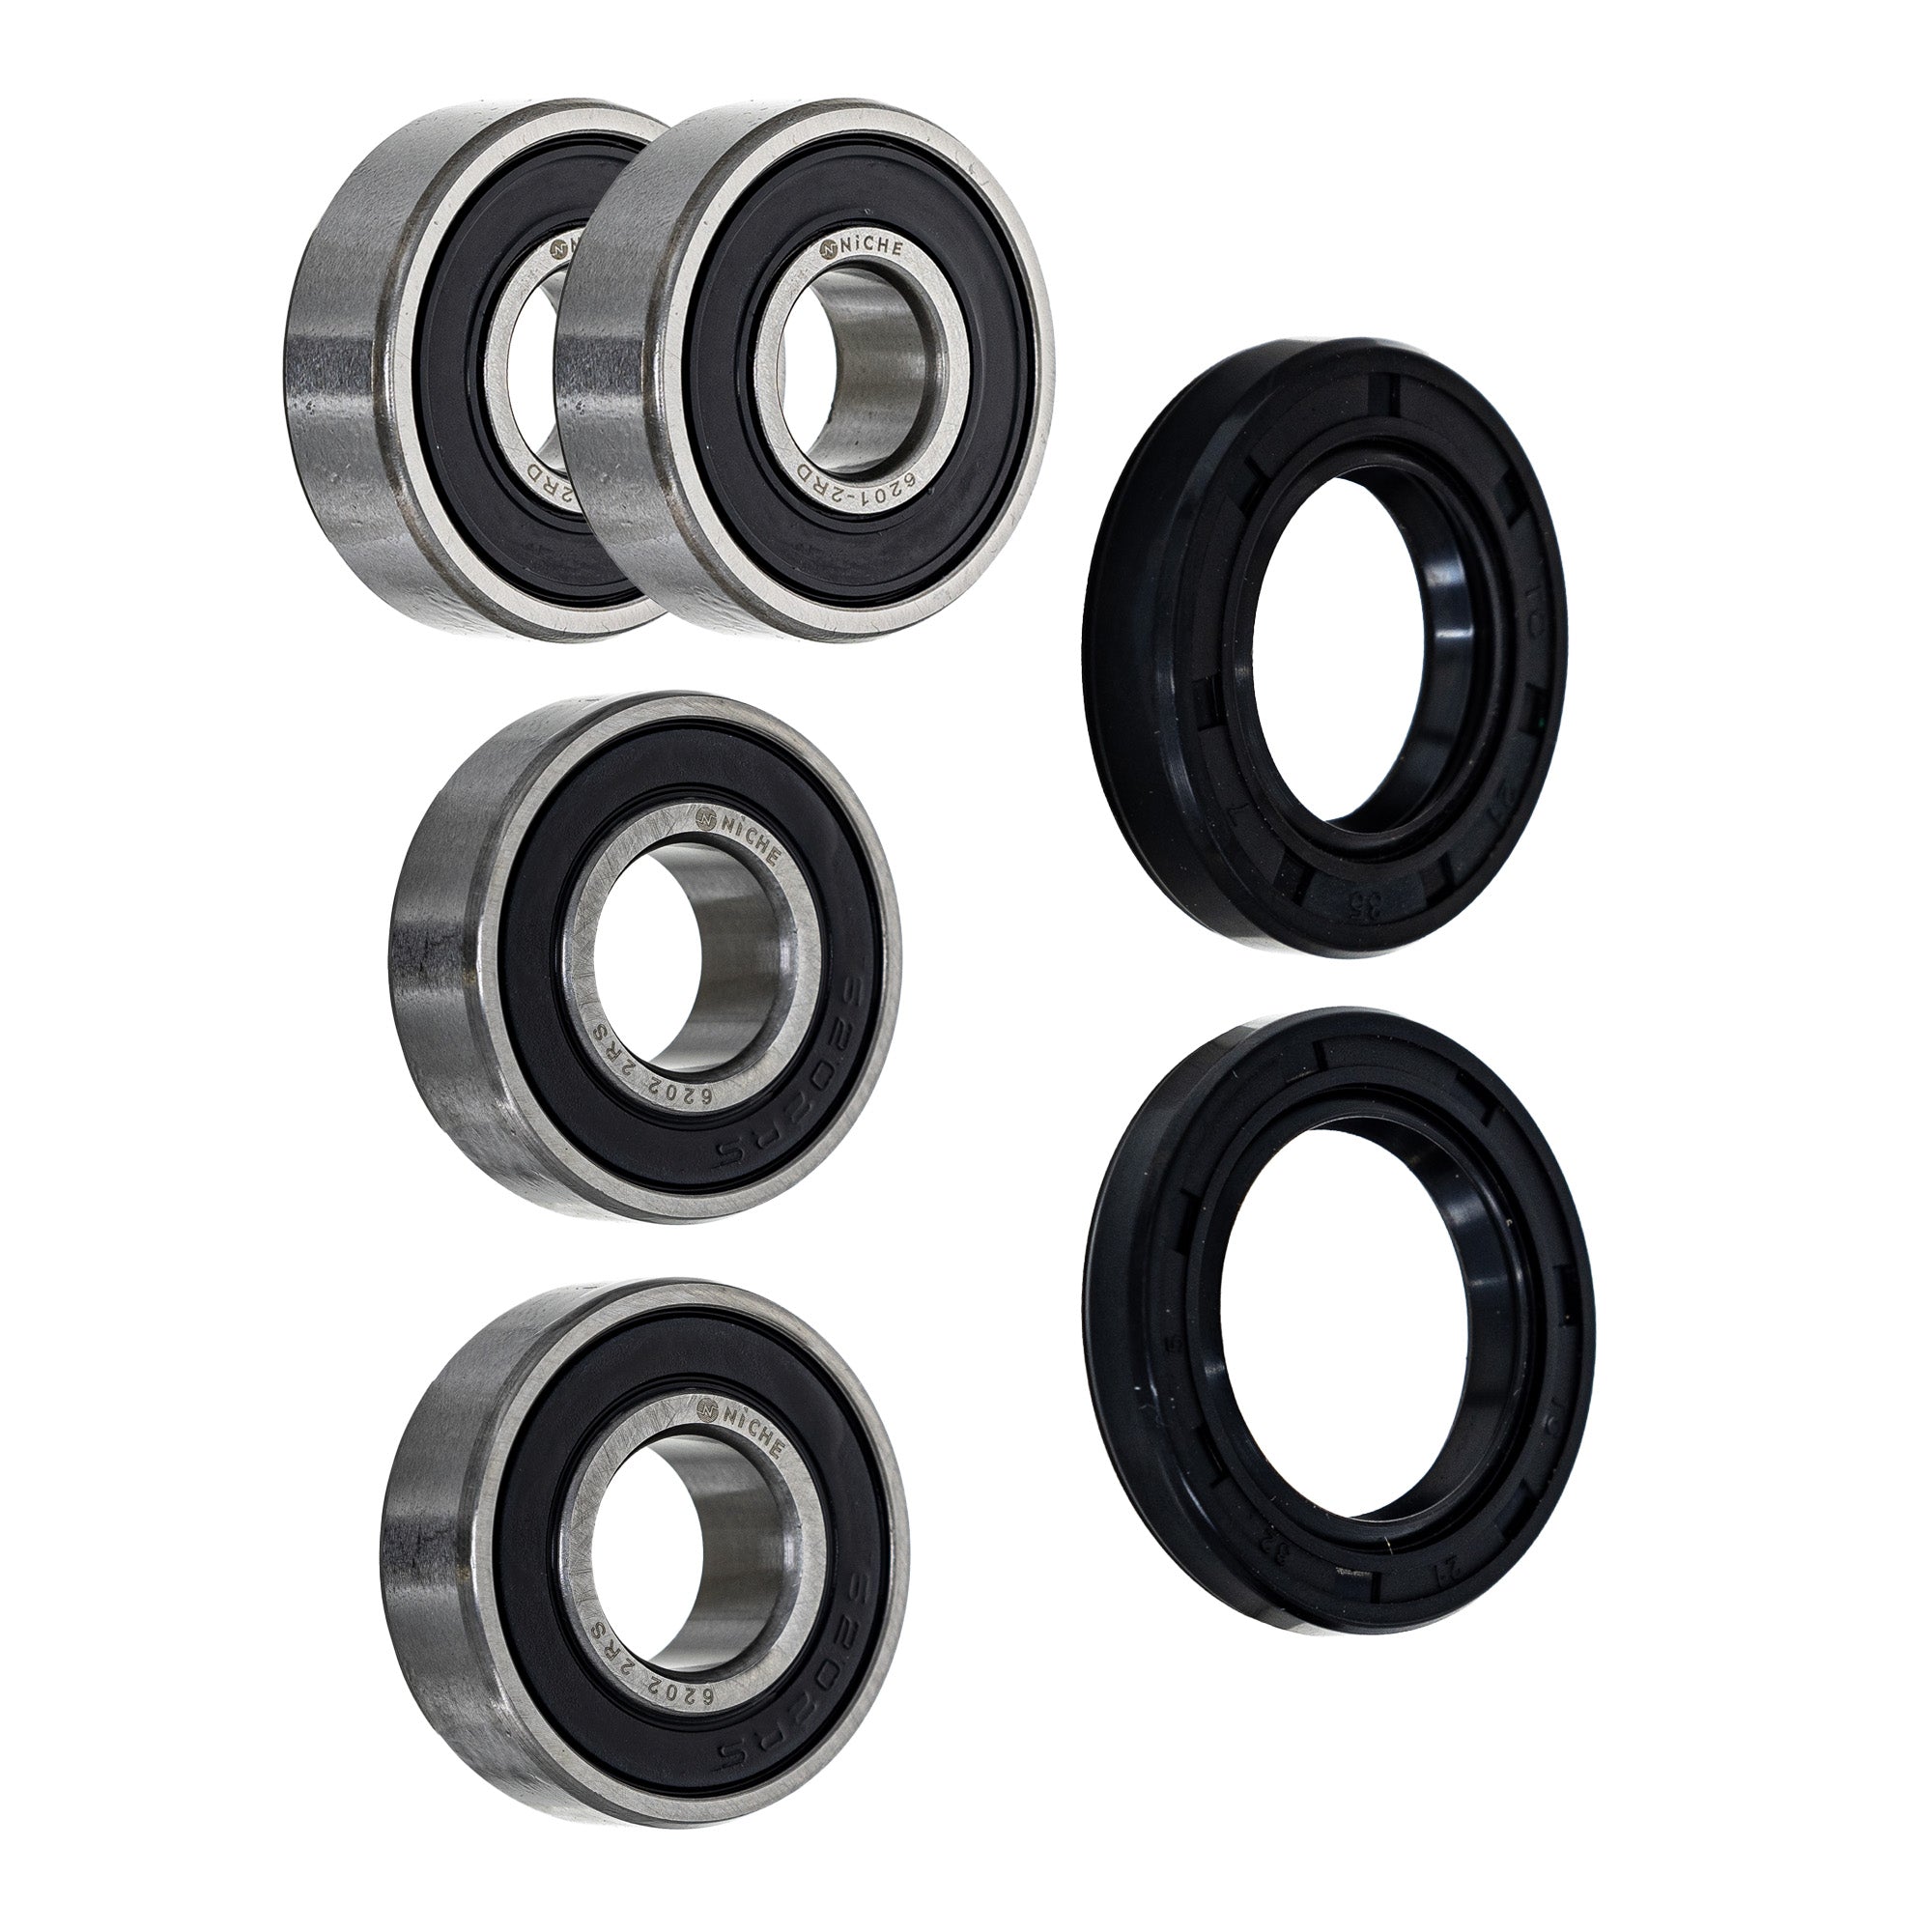 Wheel Bearing Seal Kit for zOTHER Ref No Expert Elsinore CR80R NICHE MK1008792